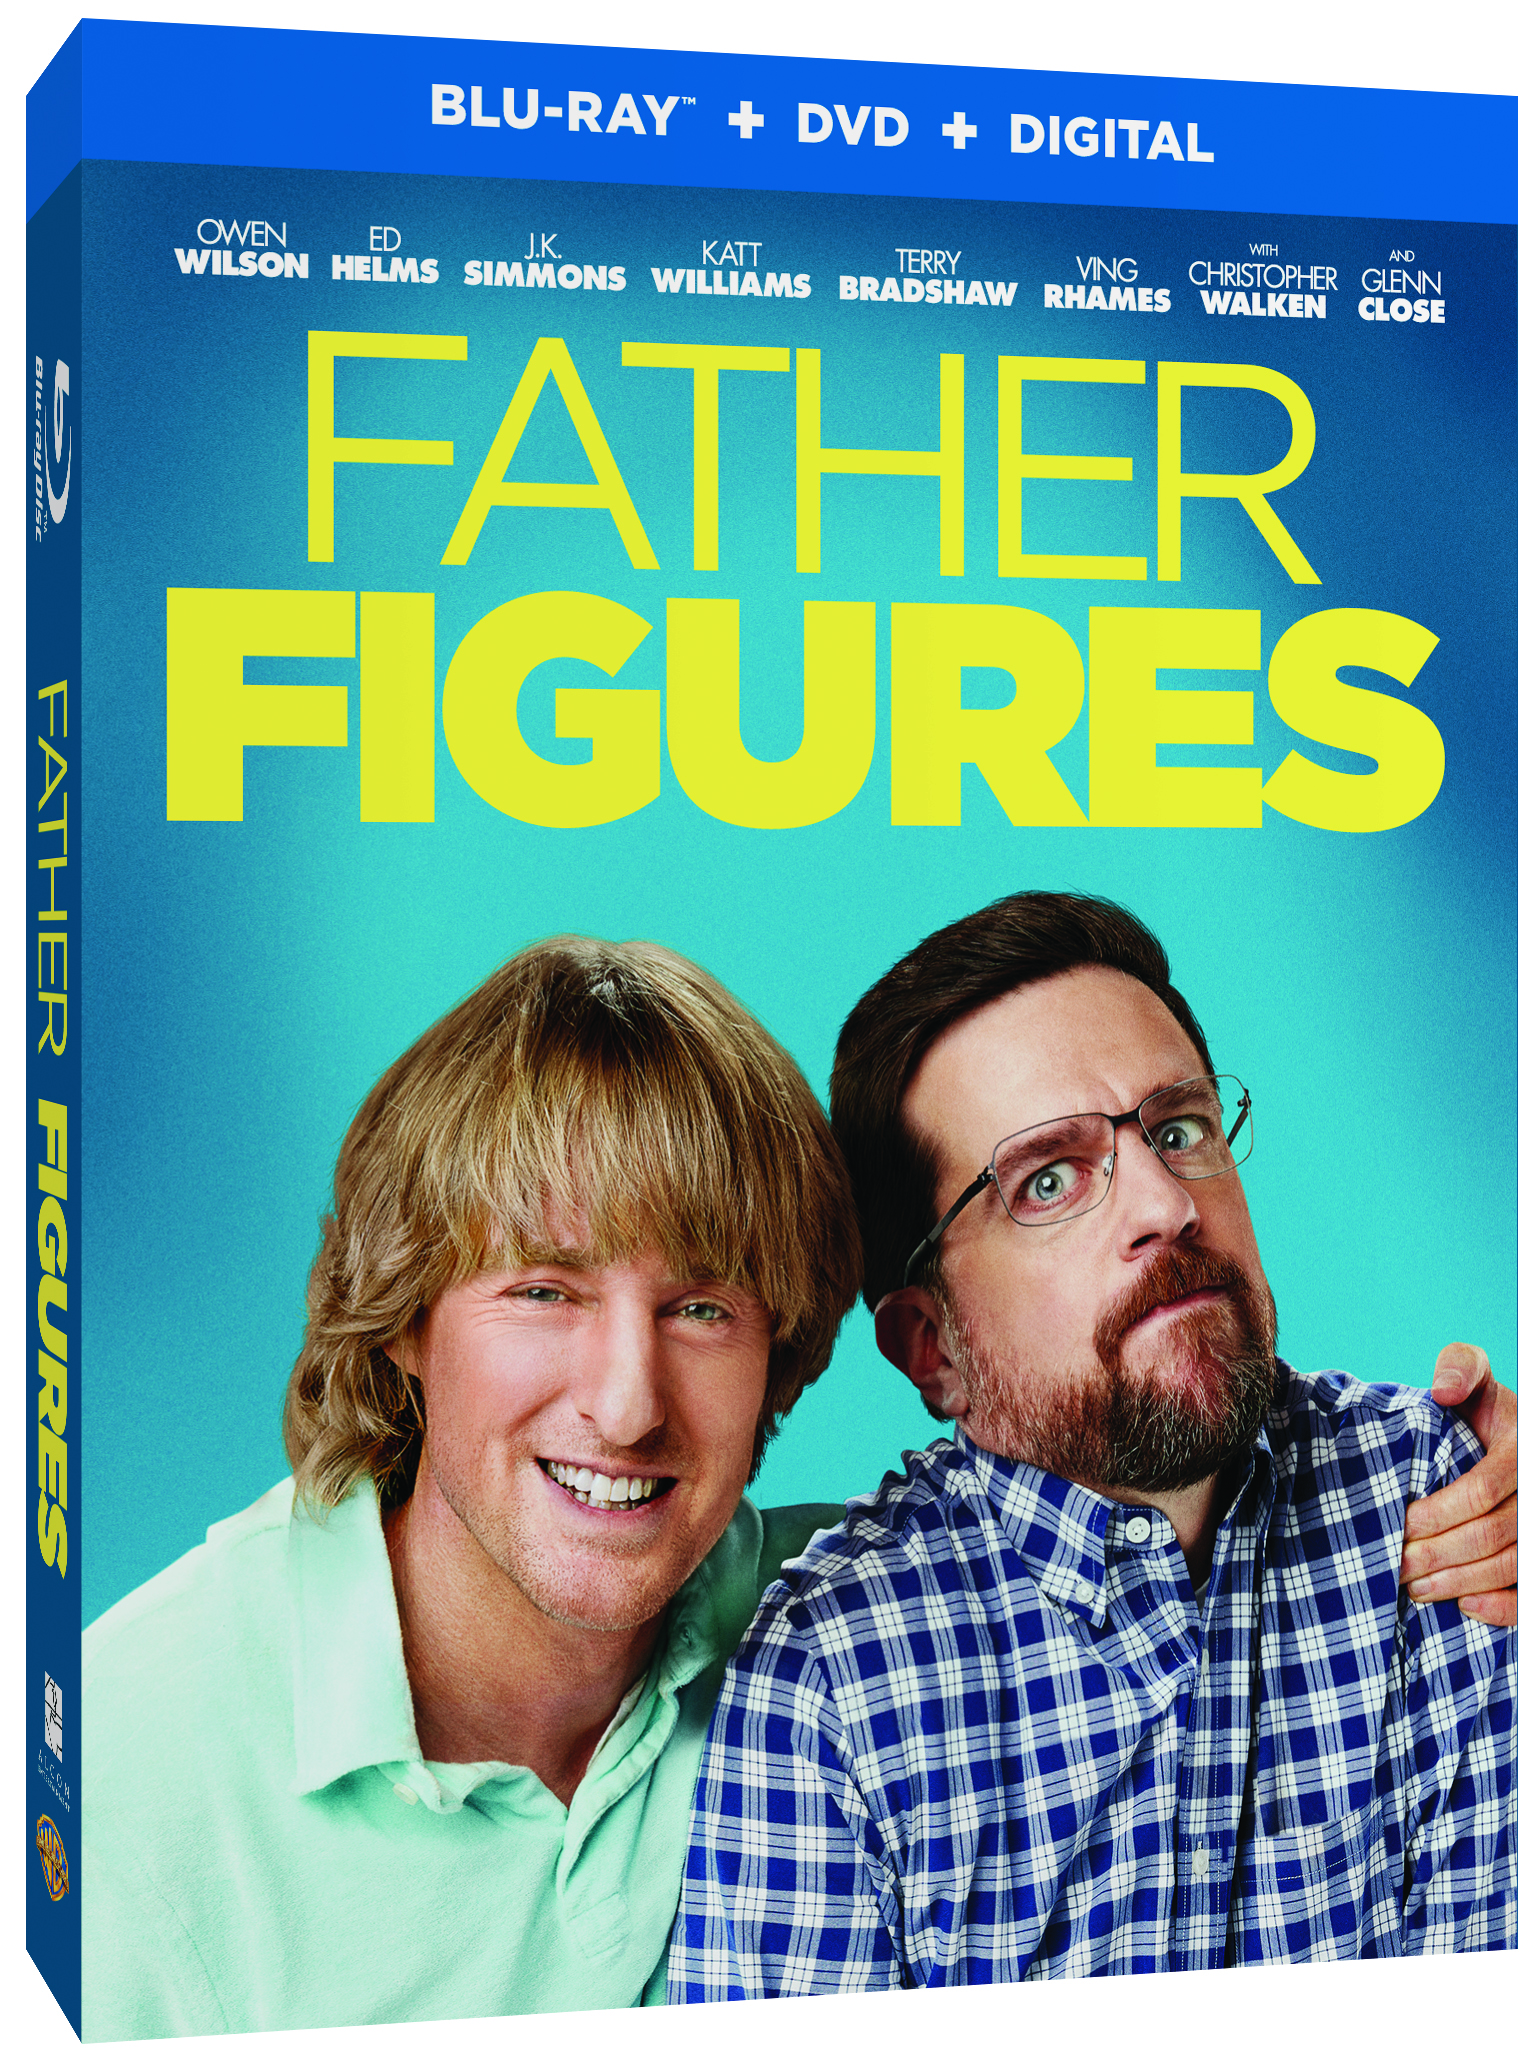 Father Figures Blu-Ray Combo cover (Warner Bros. Home Entertainment)